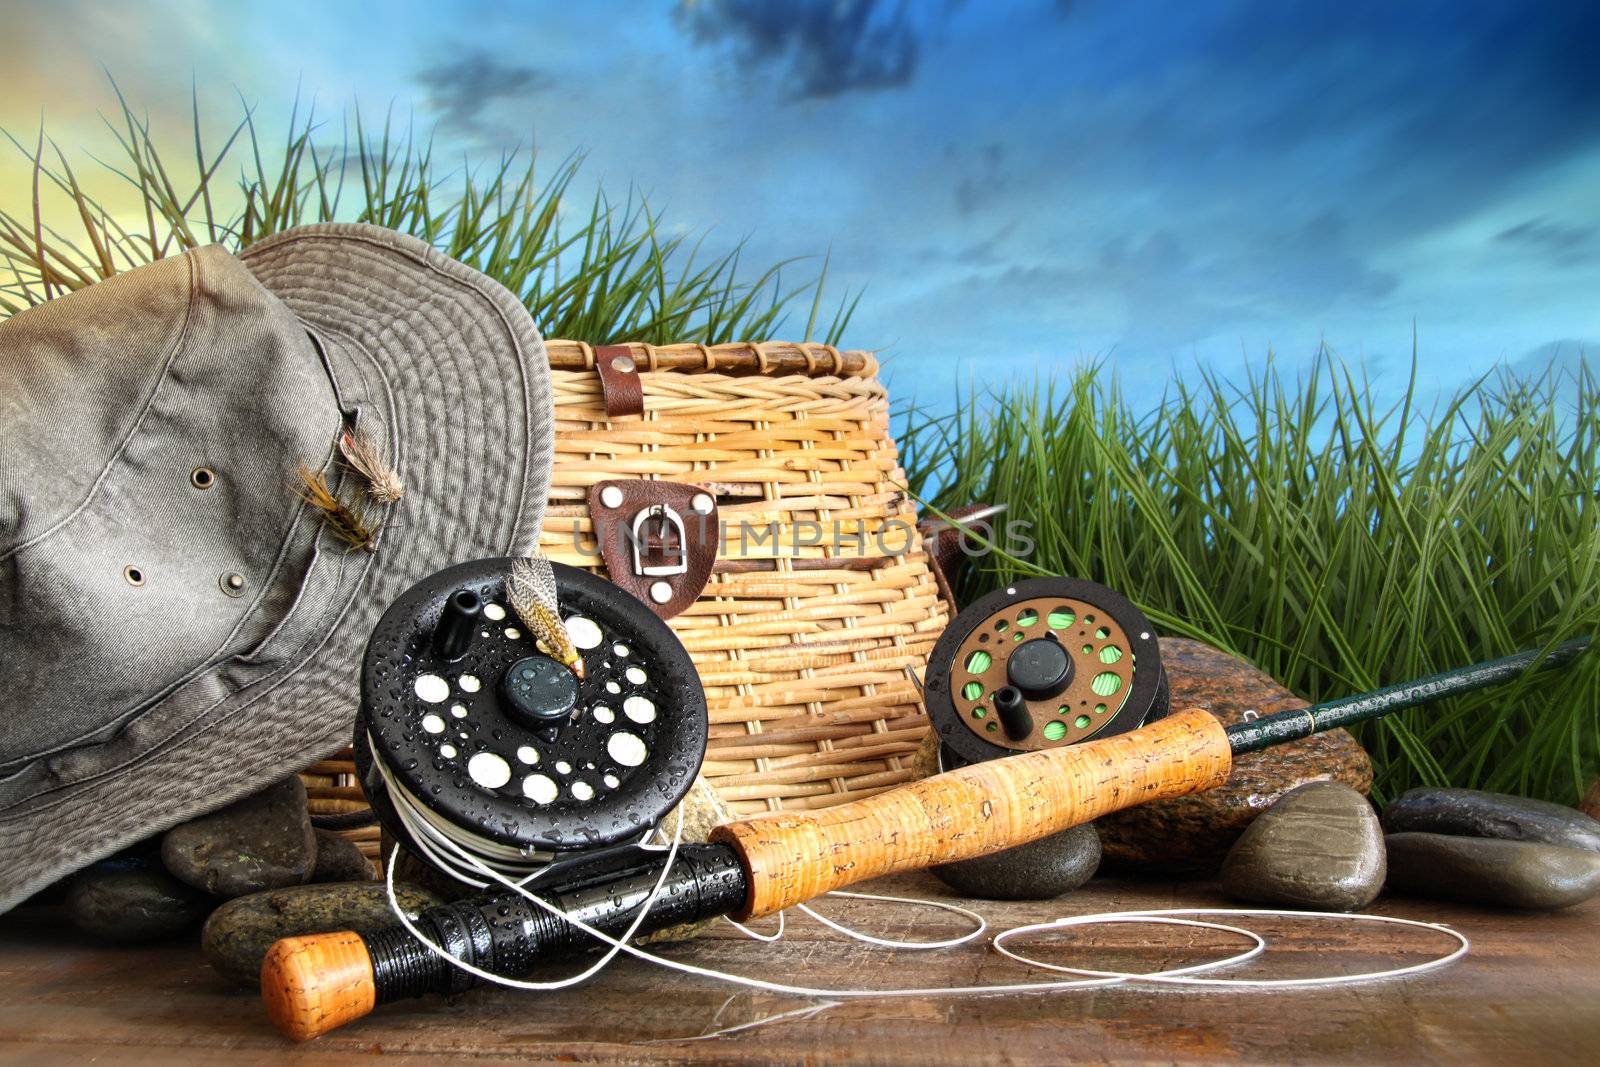 Fly fishing equipment with hat on wooden dock by Sandralise